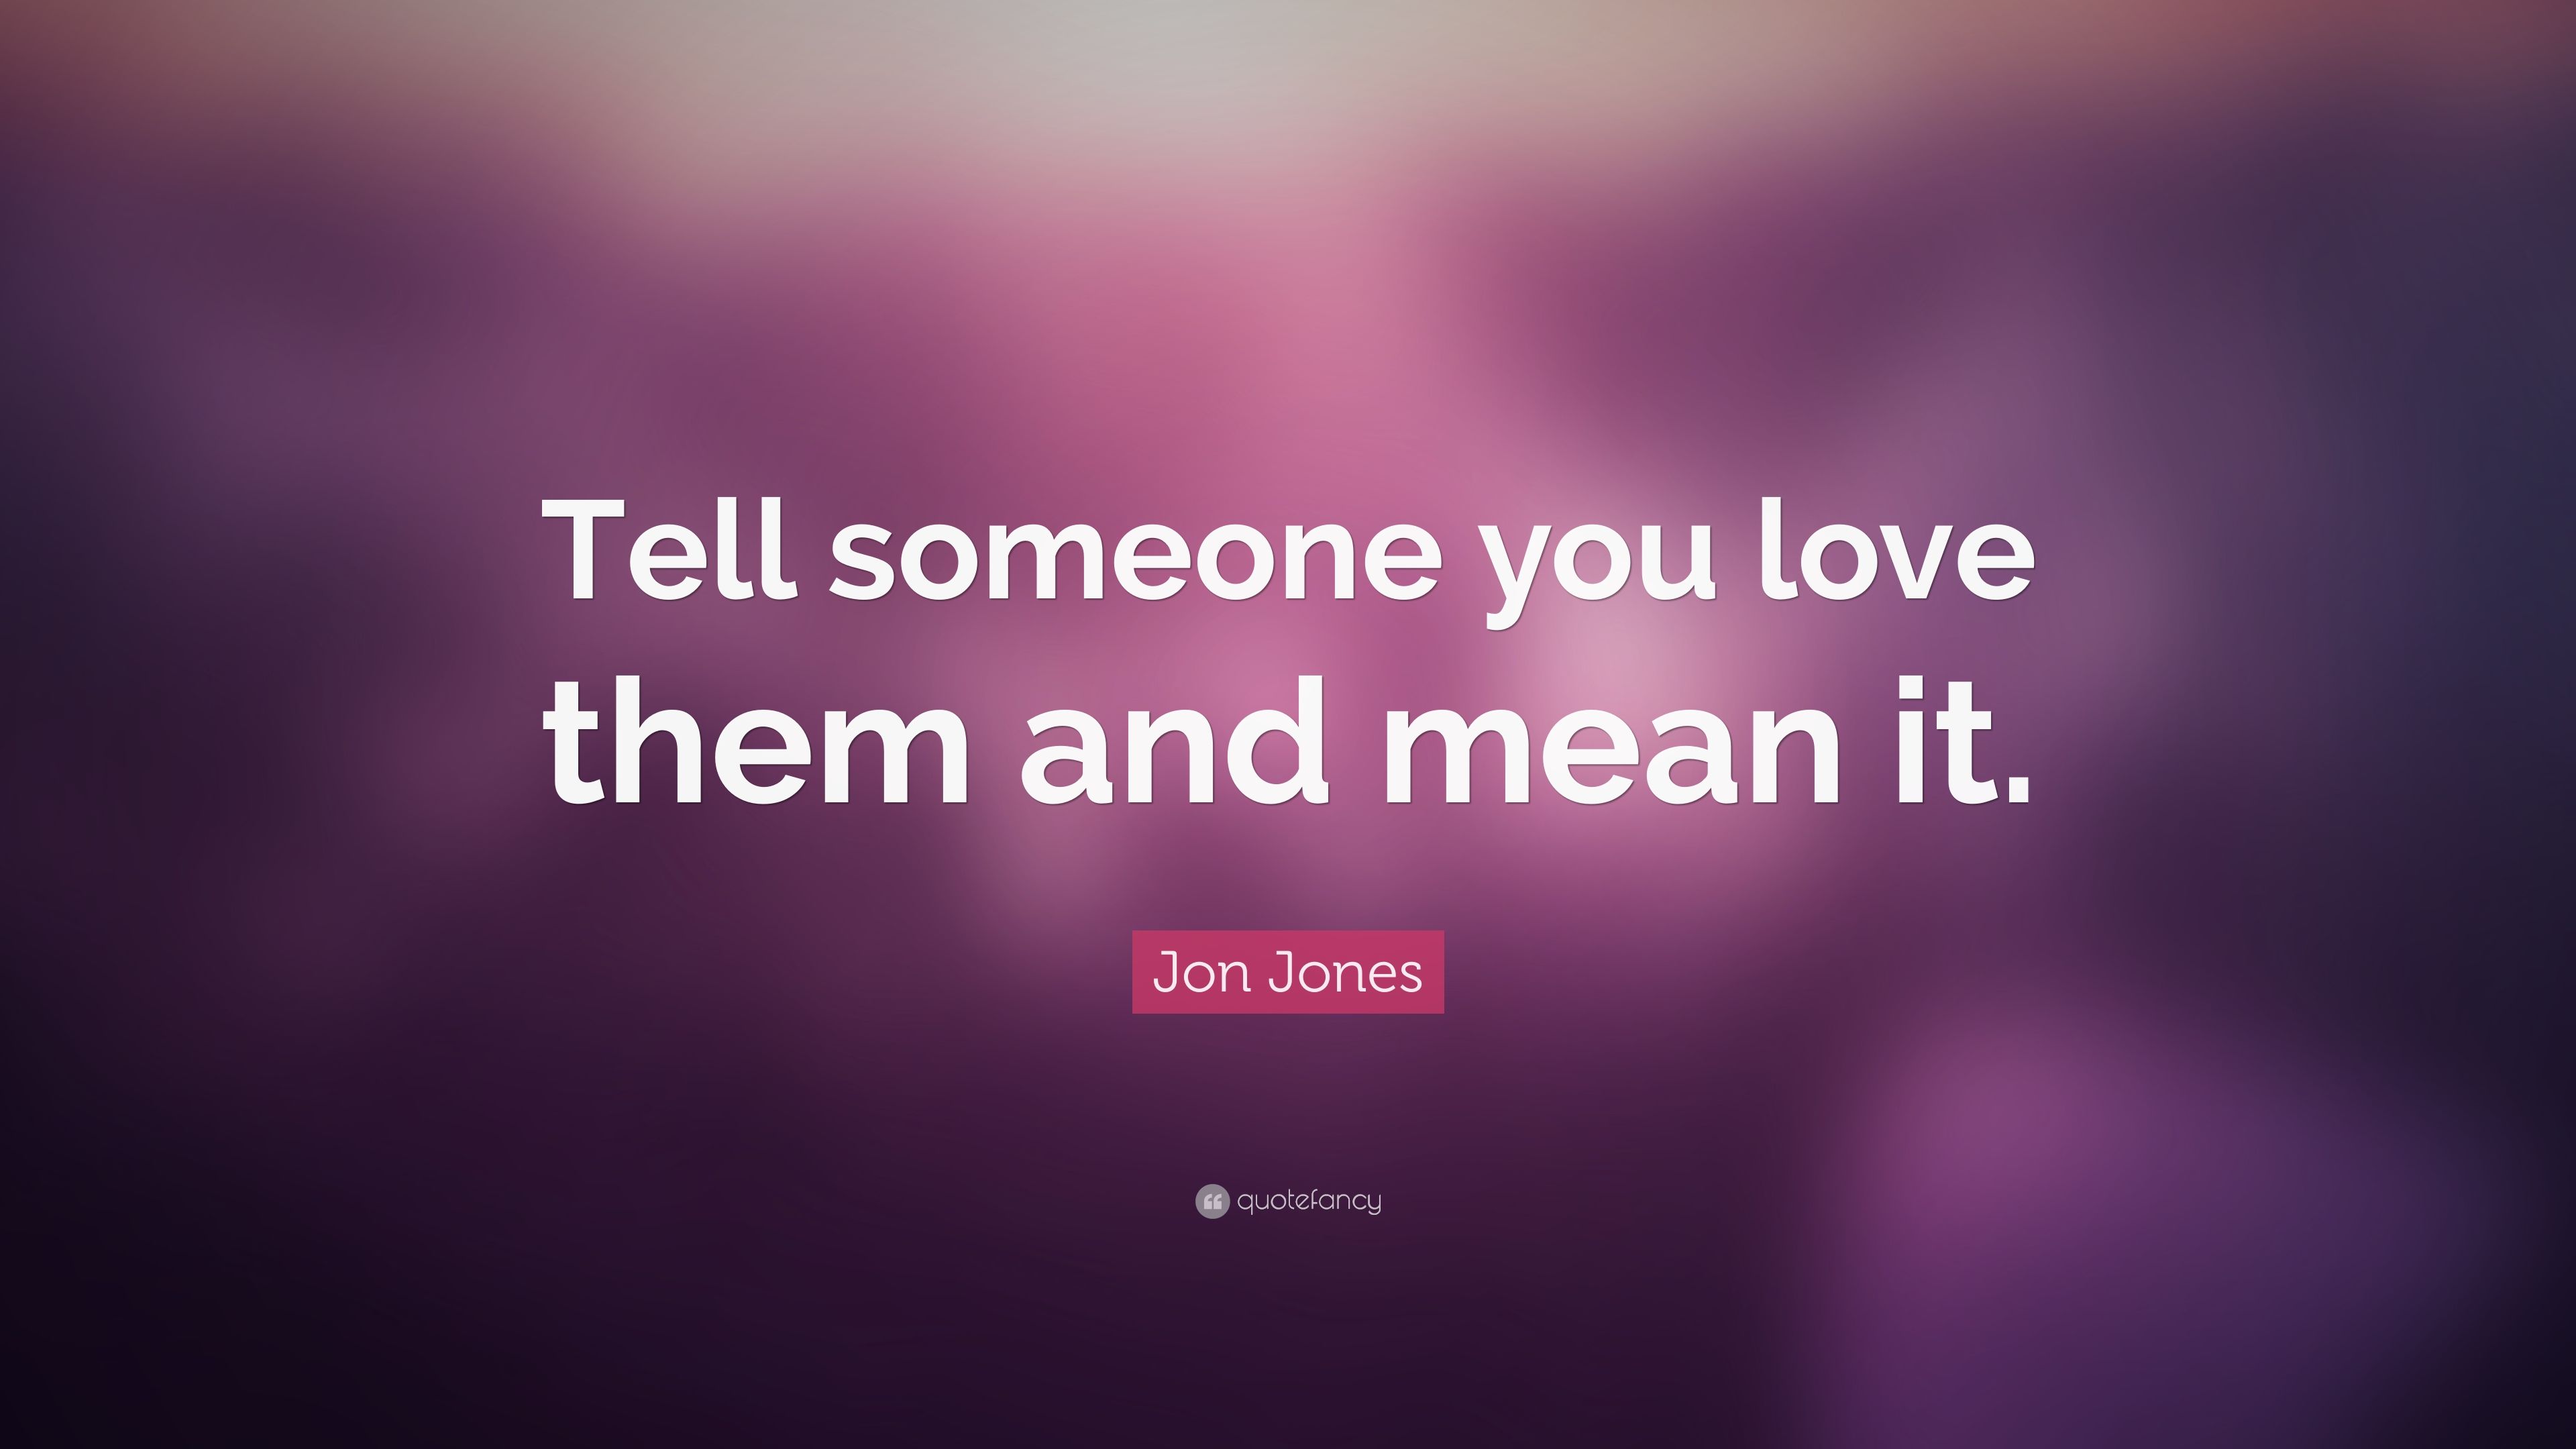 Jon Jones Quote: “Tell someone you love them and mean it.” 7